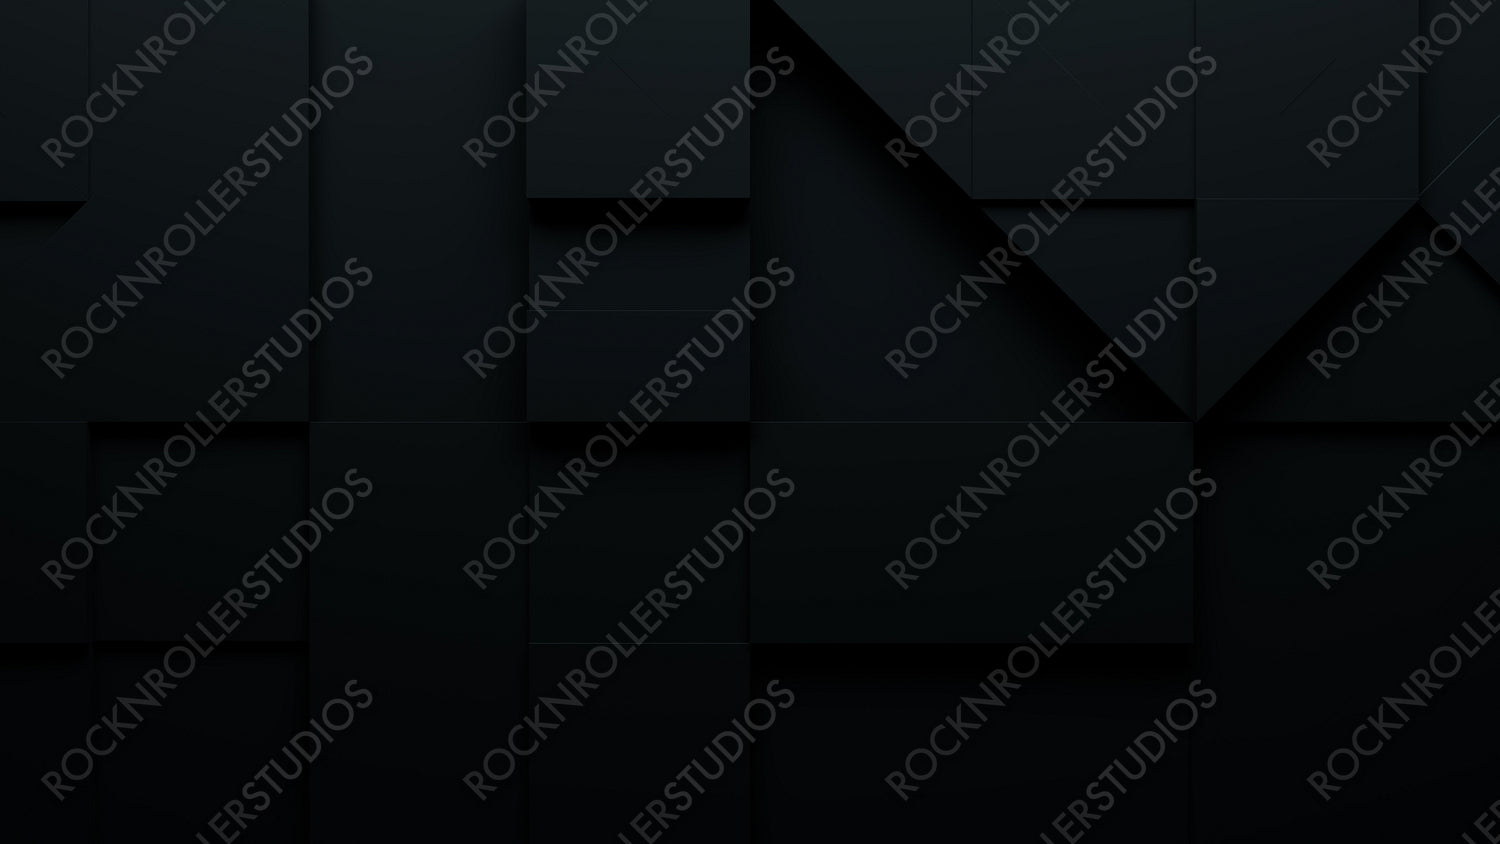 3D blocks of different shapes and sizes interlock to create a wall. Black Tech background .